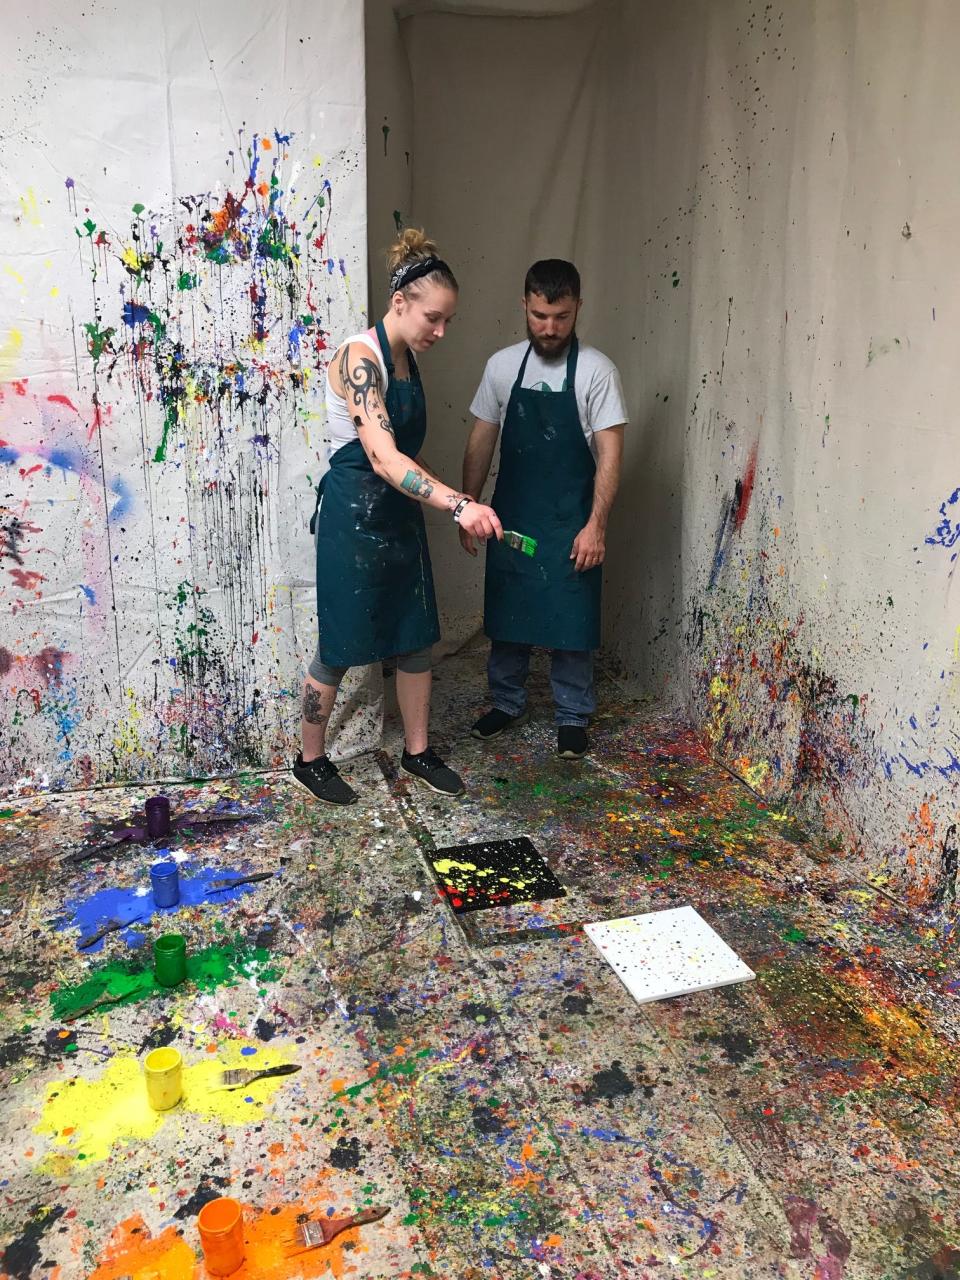 Lovebirds can enjoy an adult couples splatter workshop the weekend before Valentine's Day Feb. 11 at Akron ArtWorks in the Merriman Valley.